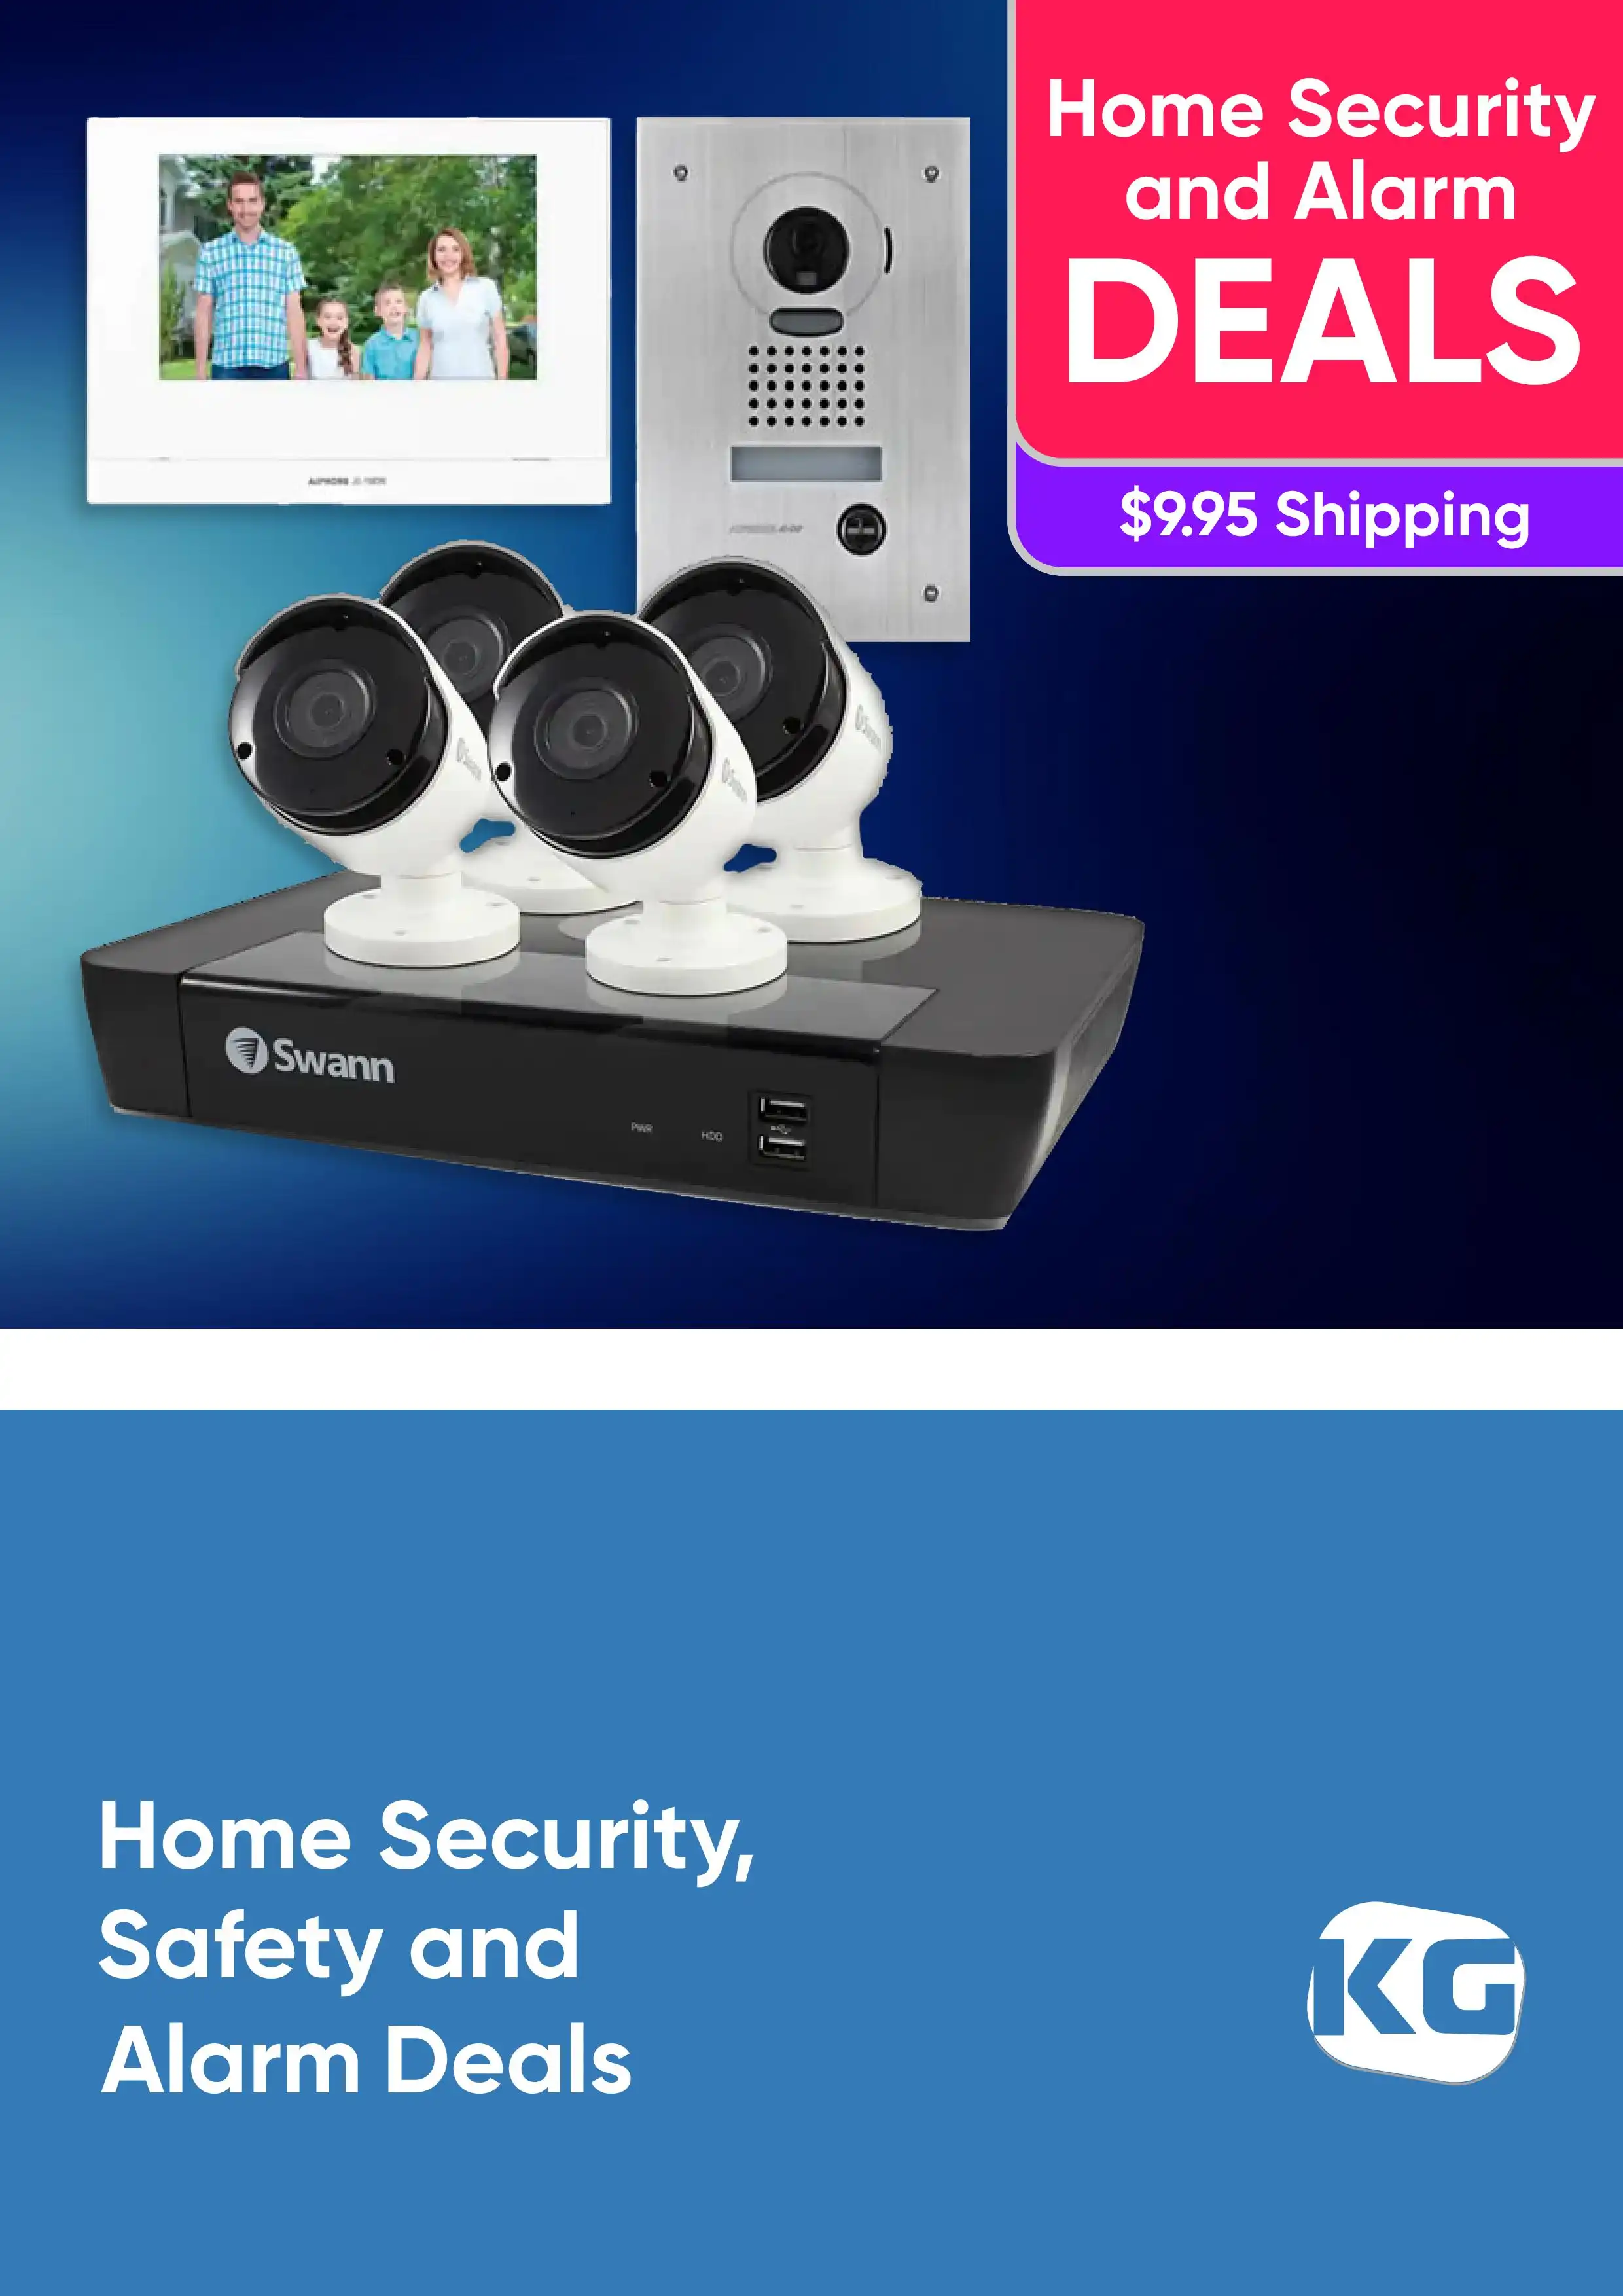 Home Security, Safety and Alarm Deals